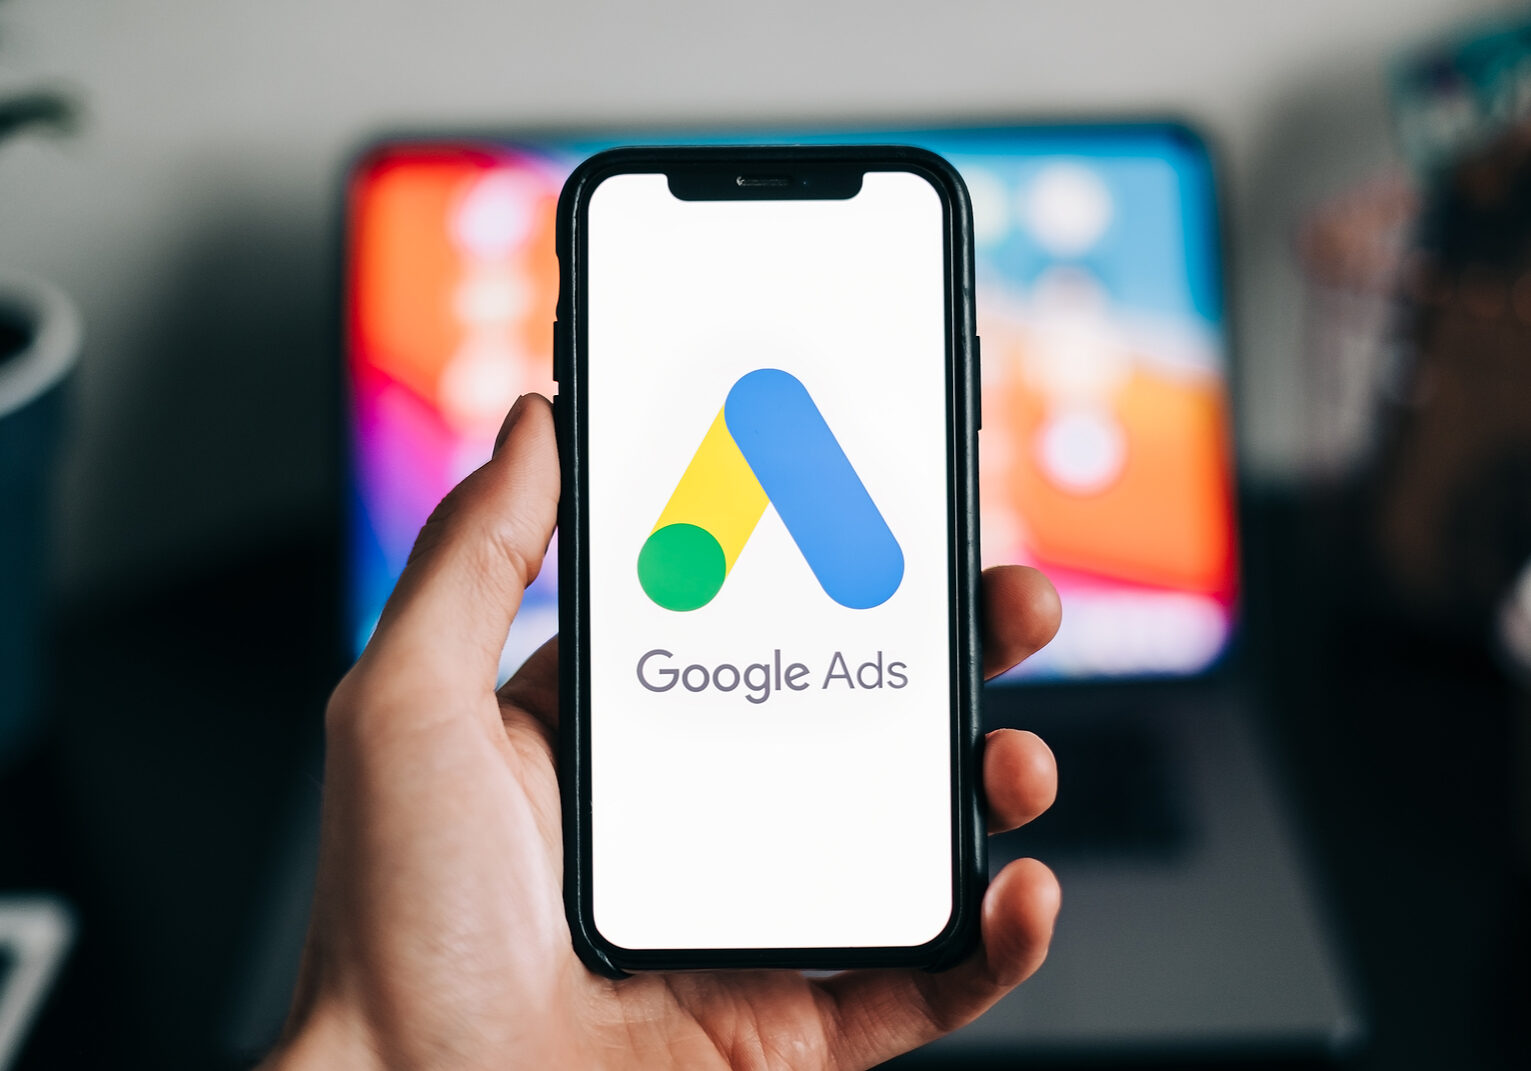 Google Ads logo on smartphone screen in hand. Rostov-on-Don, Russia. 15 February 2021